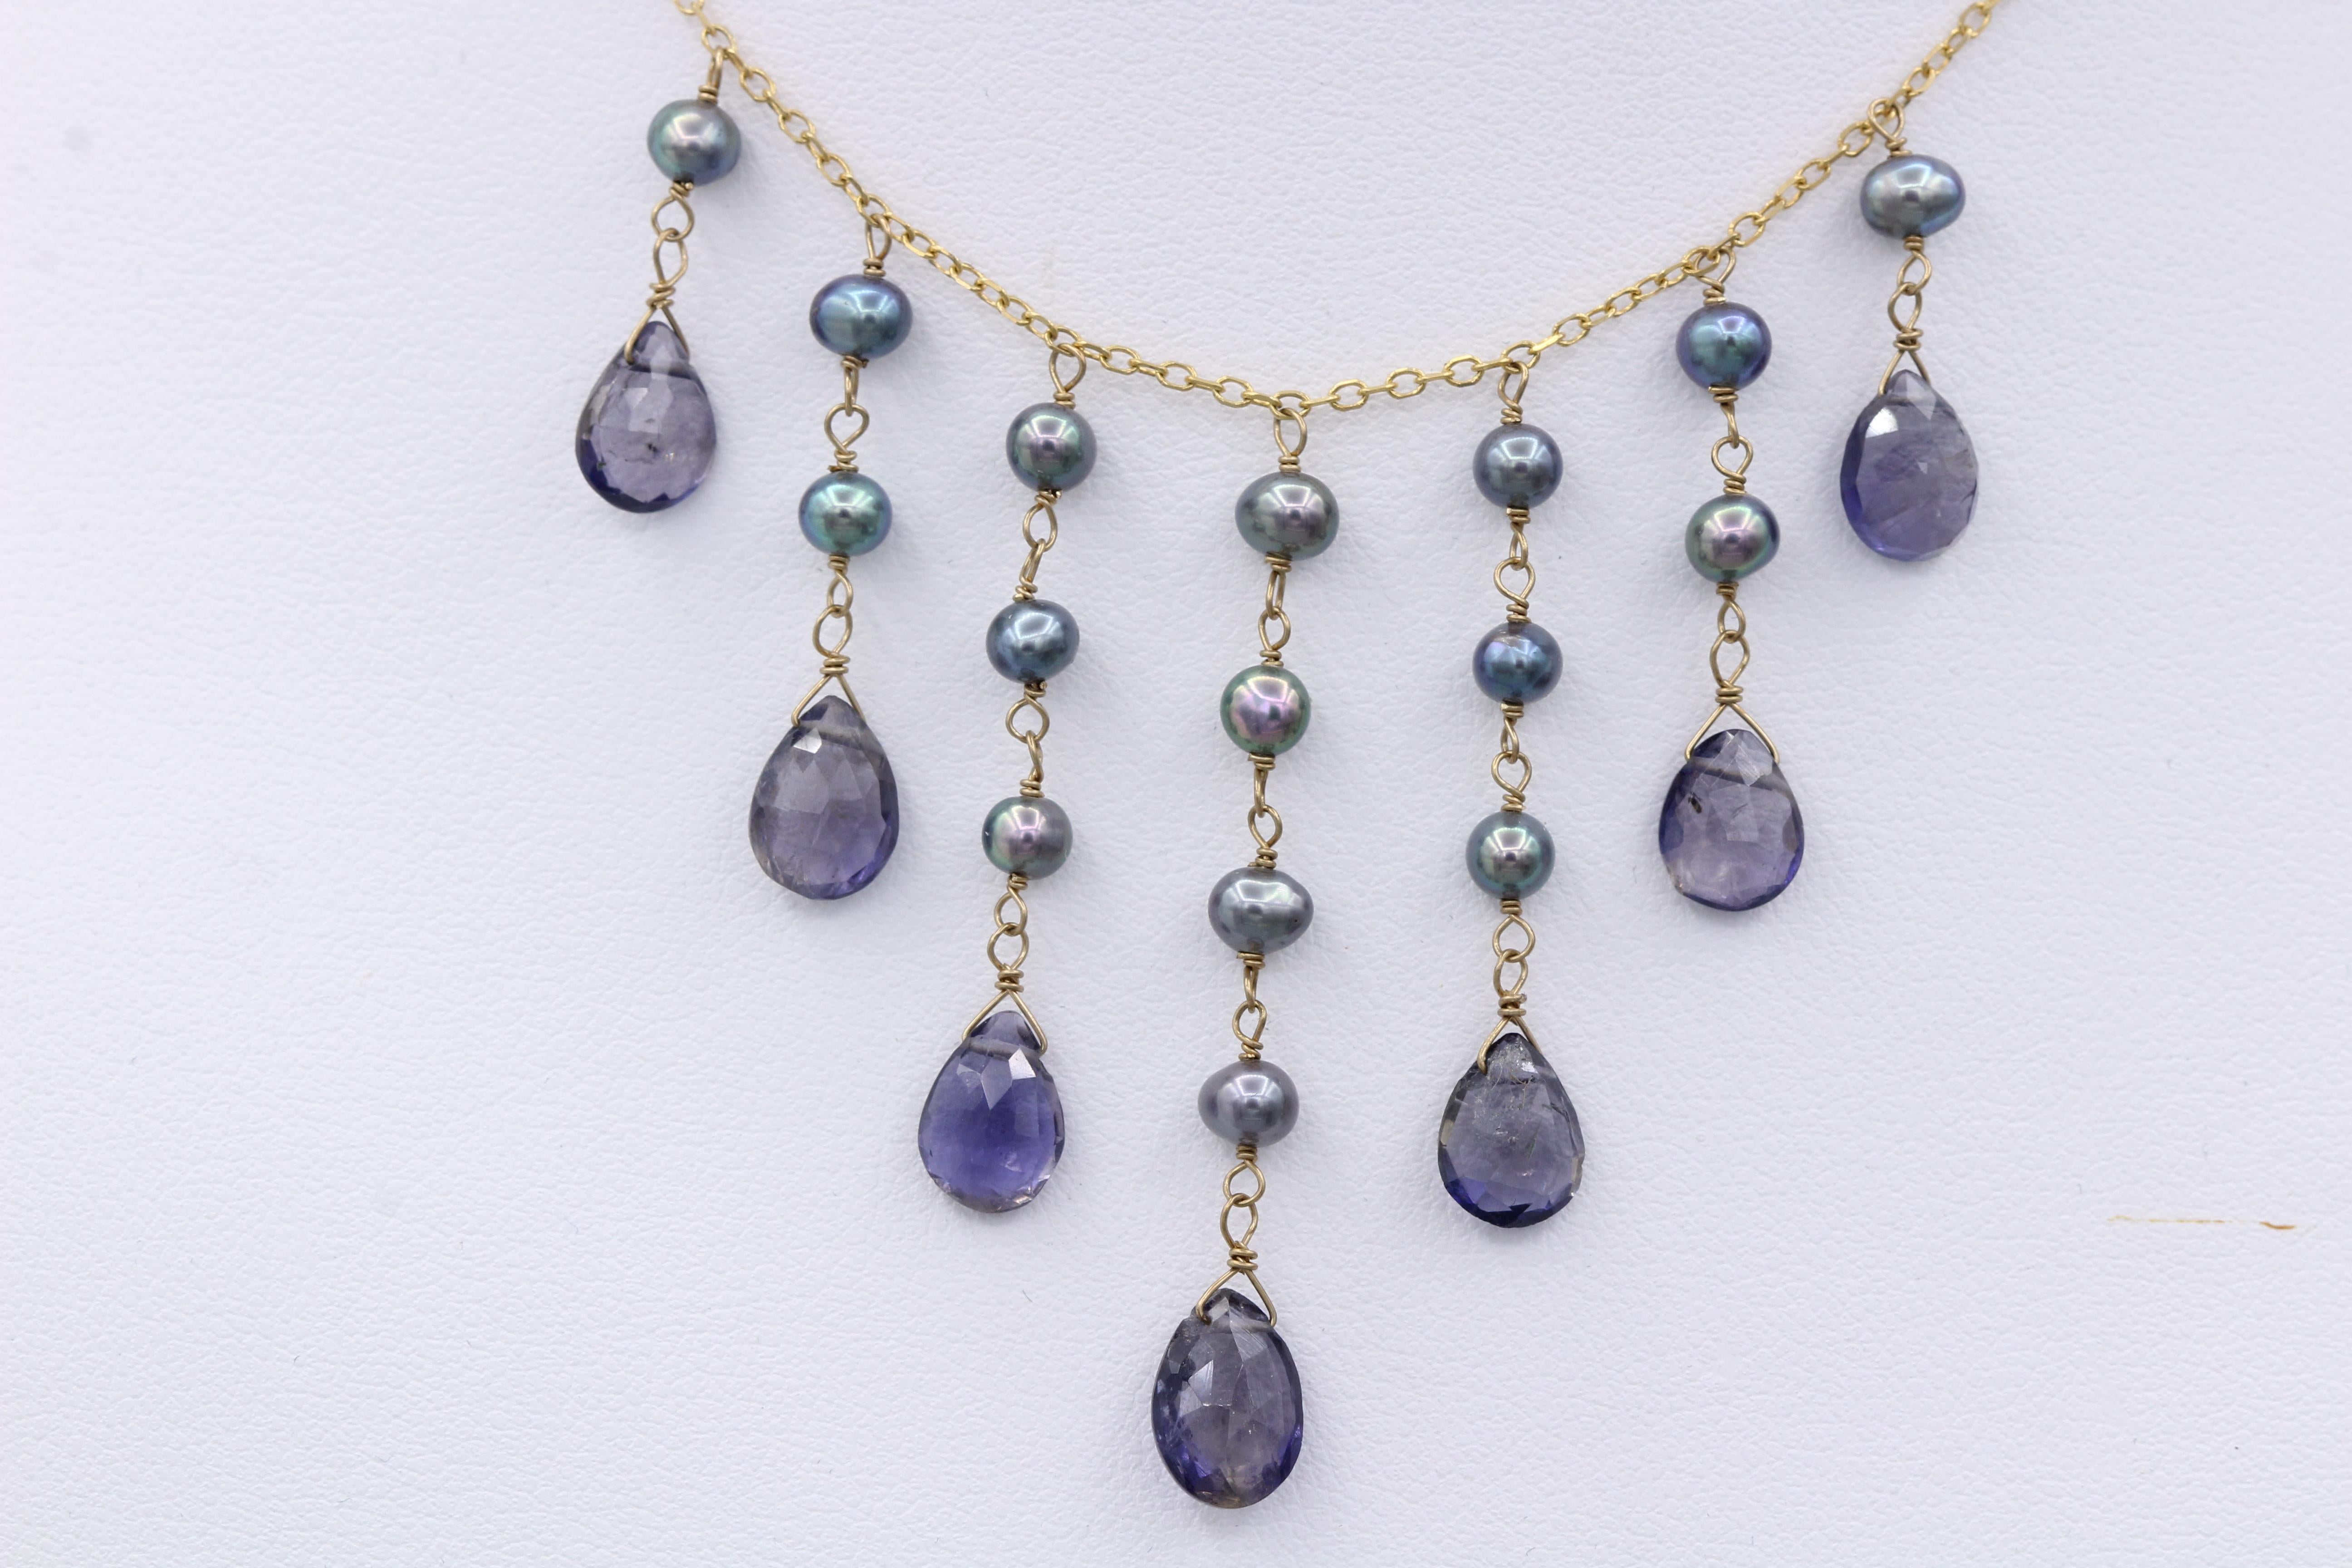 Dangling Necklace Blue Amethyst & Pearls Dangle Style 14 Karat Yellow Gold For Sale 2